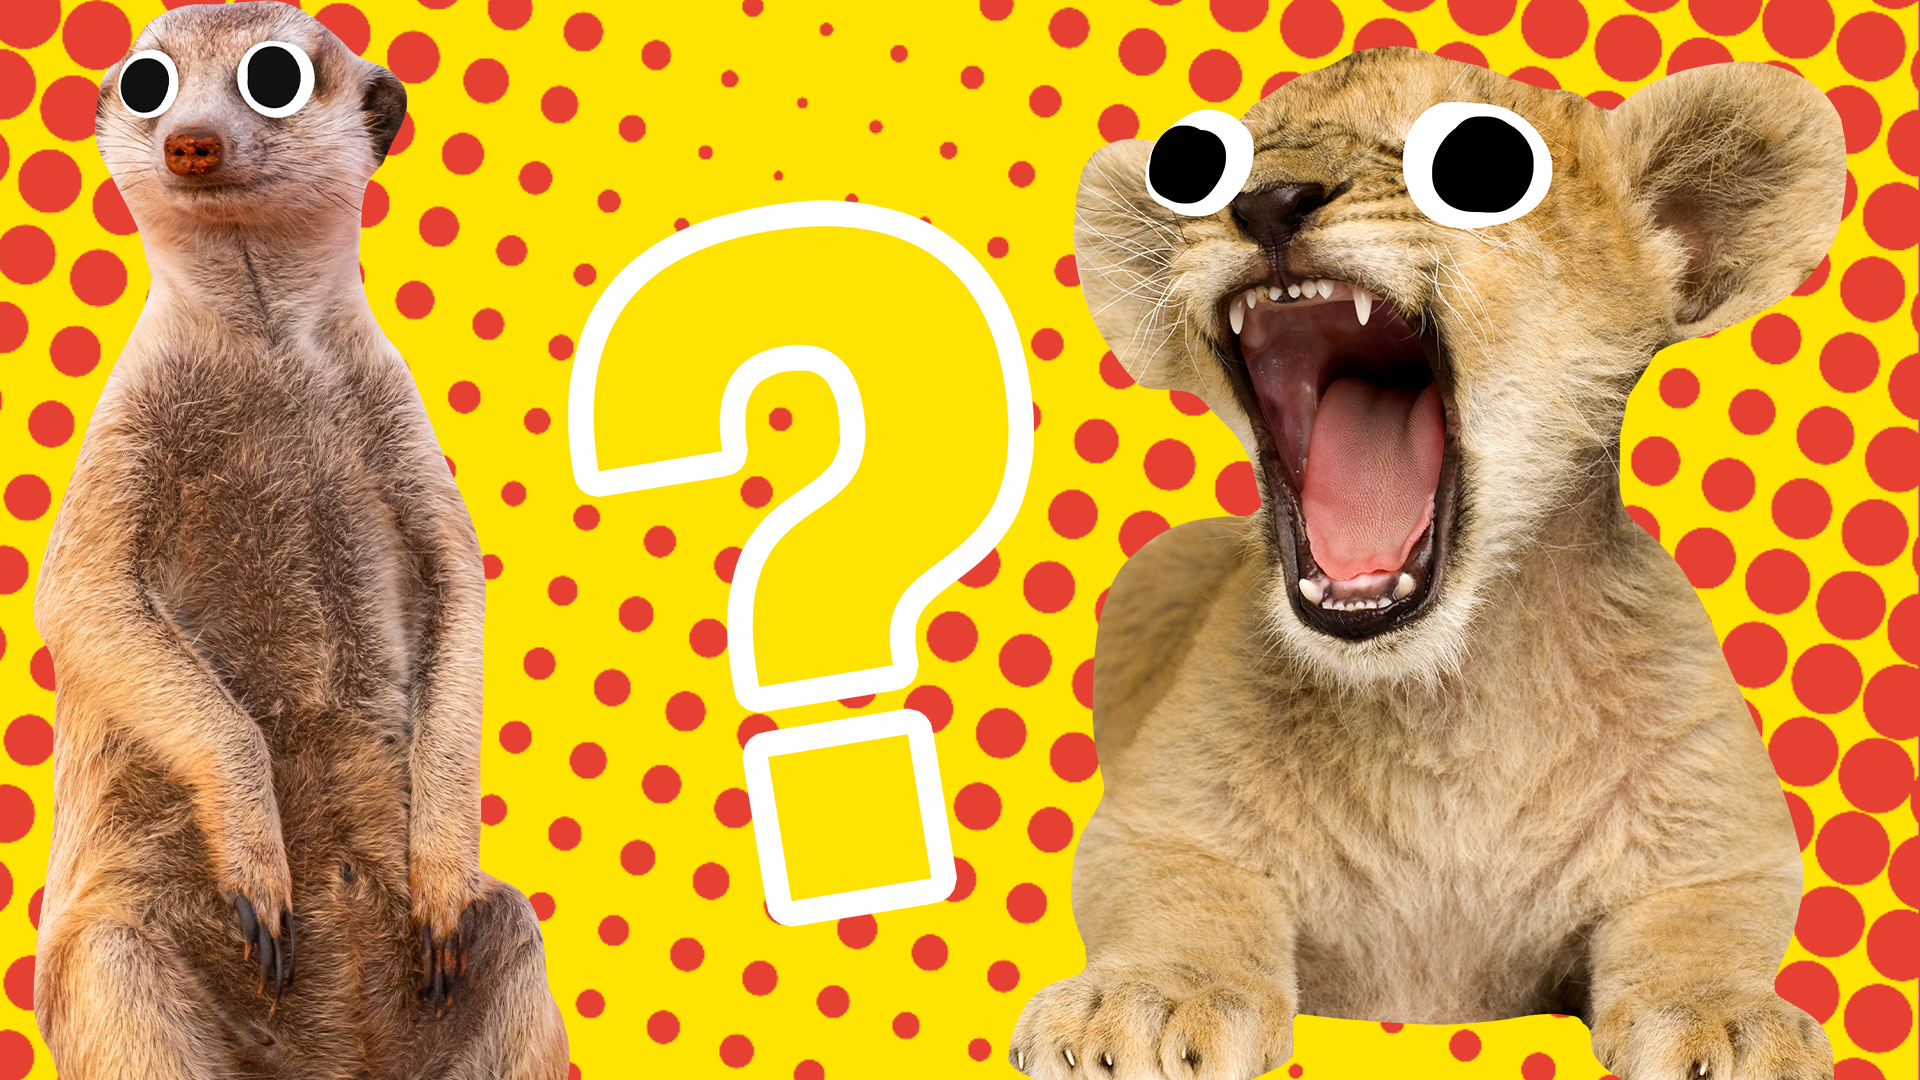 Beano Lion King characters with question mark